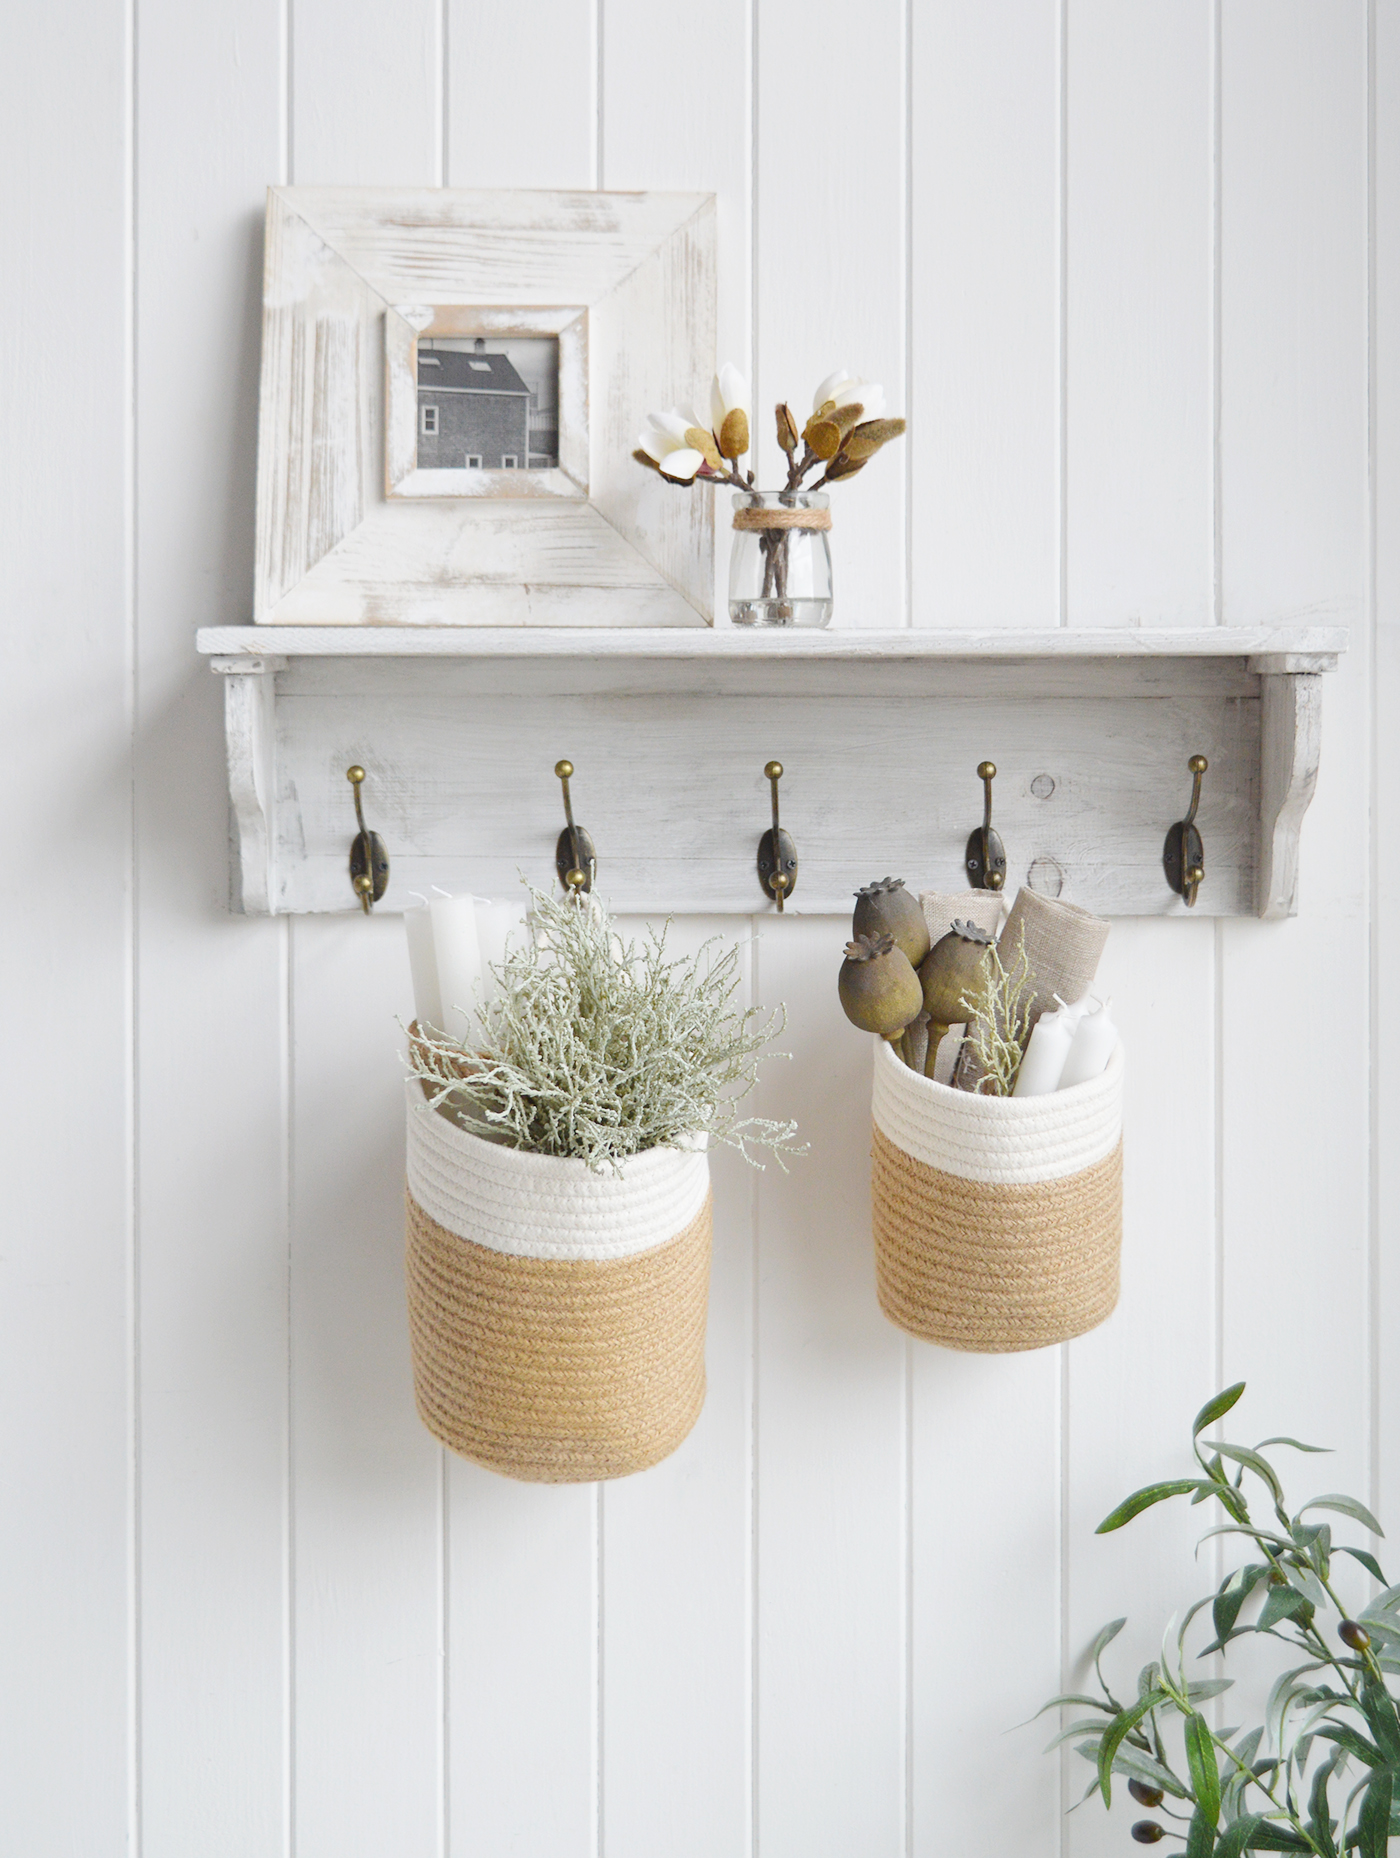 Campton set of hanging rope Baskets - New England modern country, coastal and farmhouse furniture and interiors